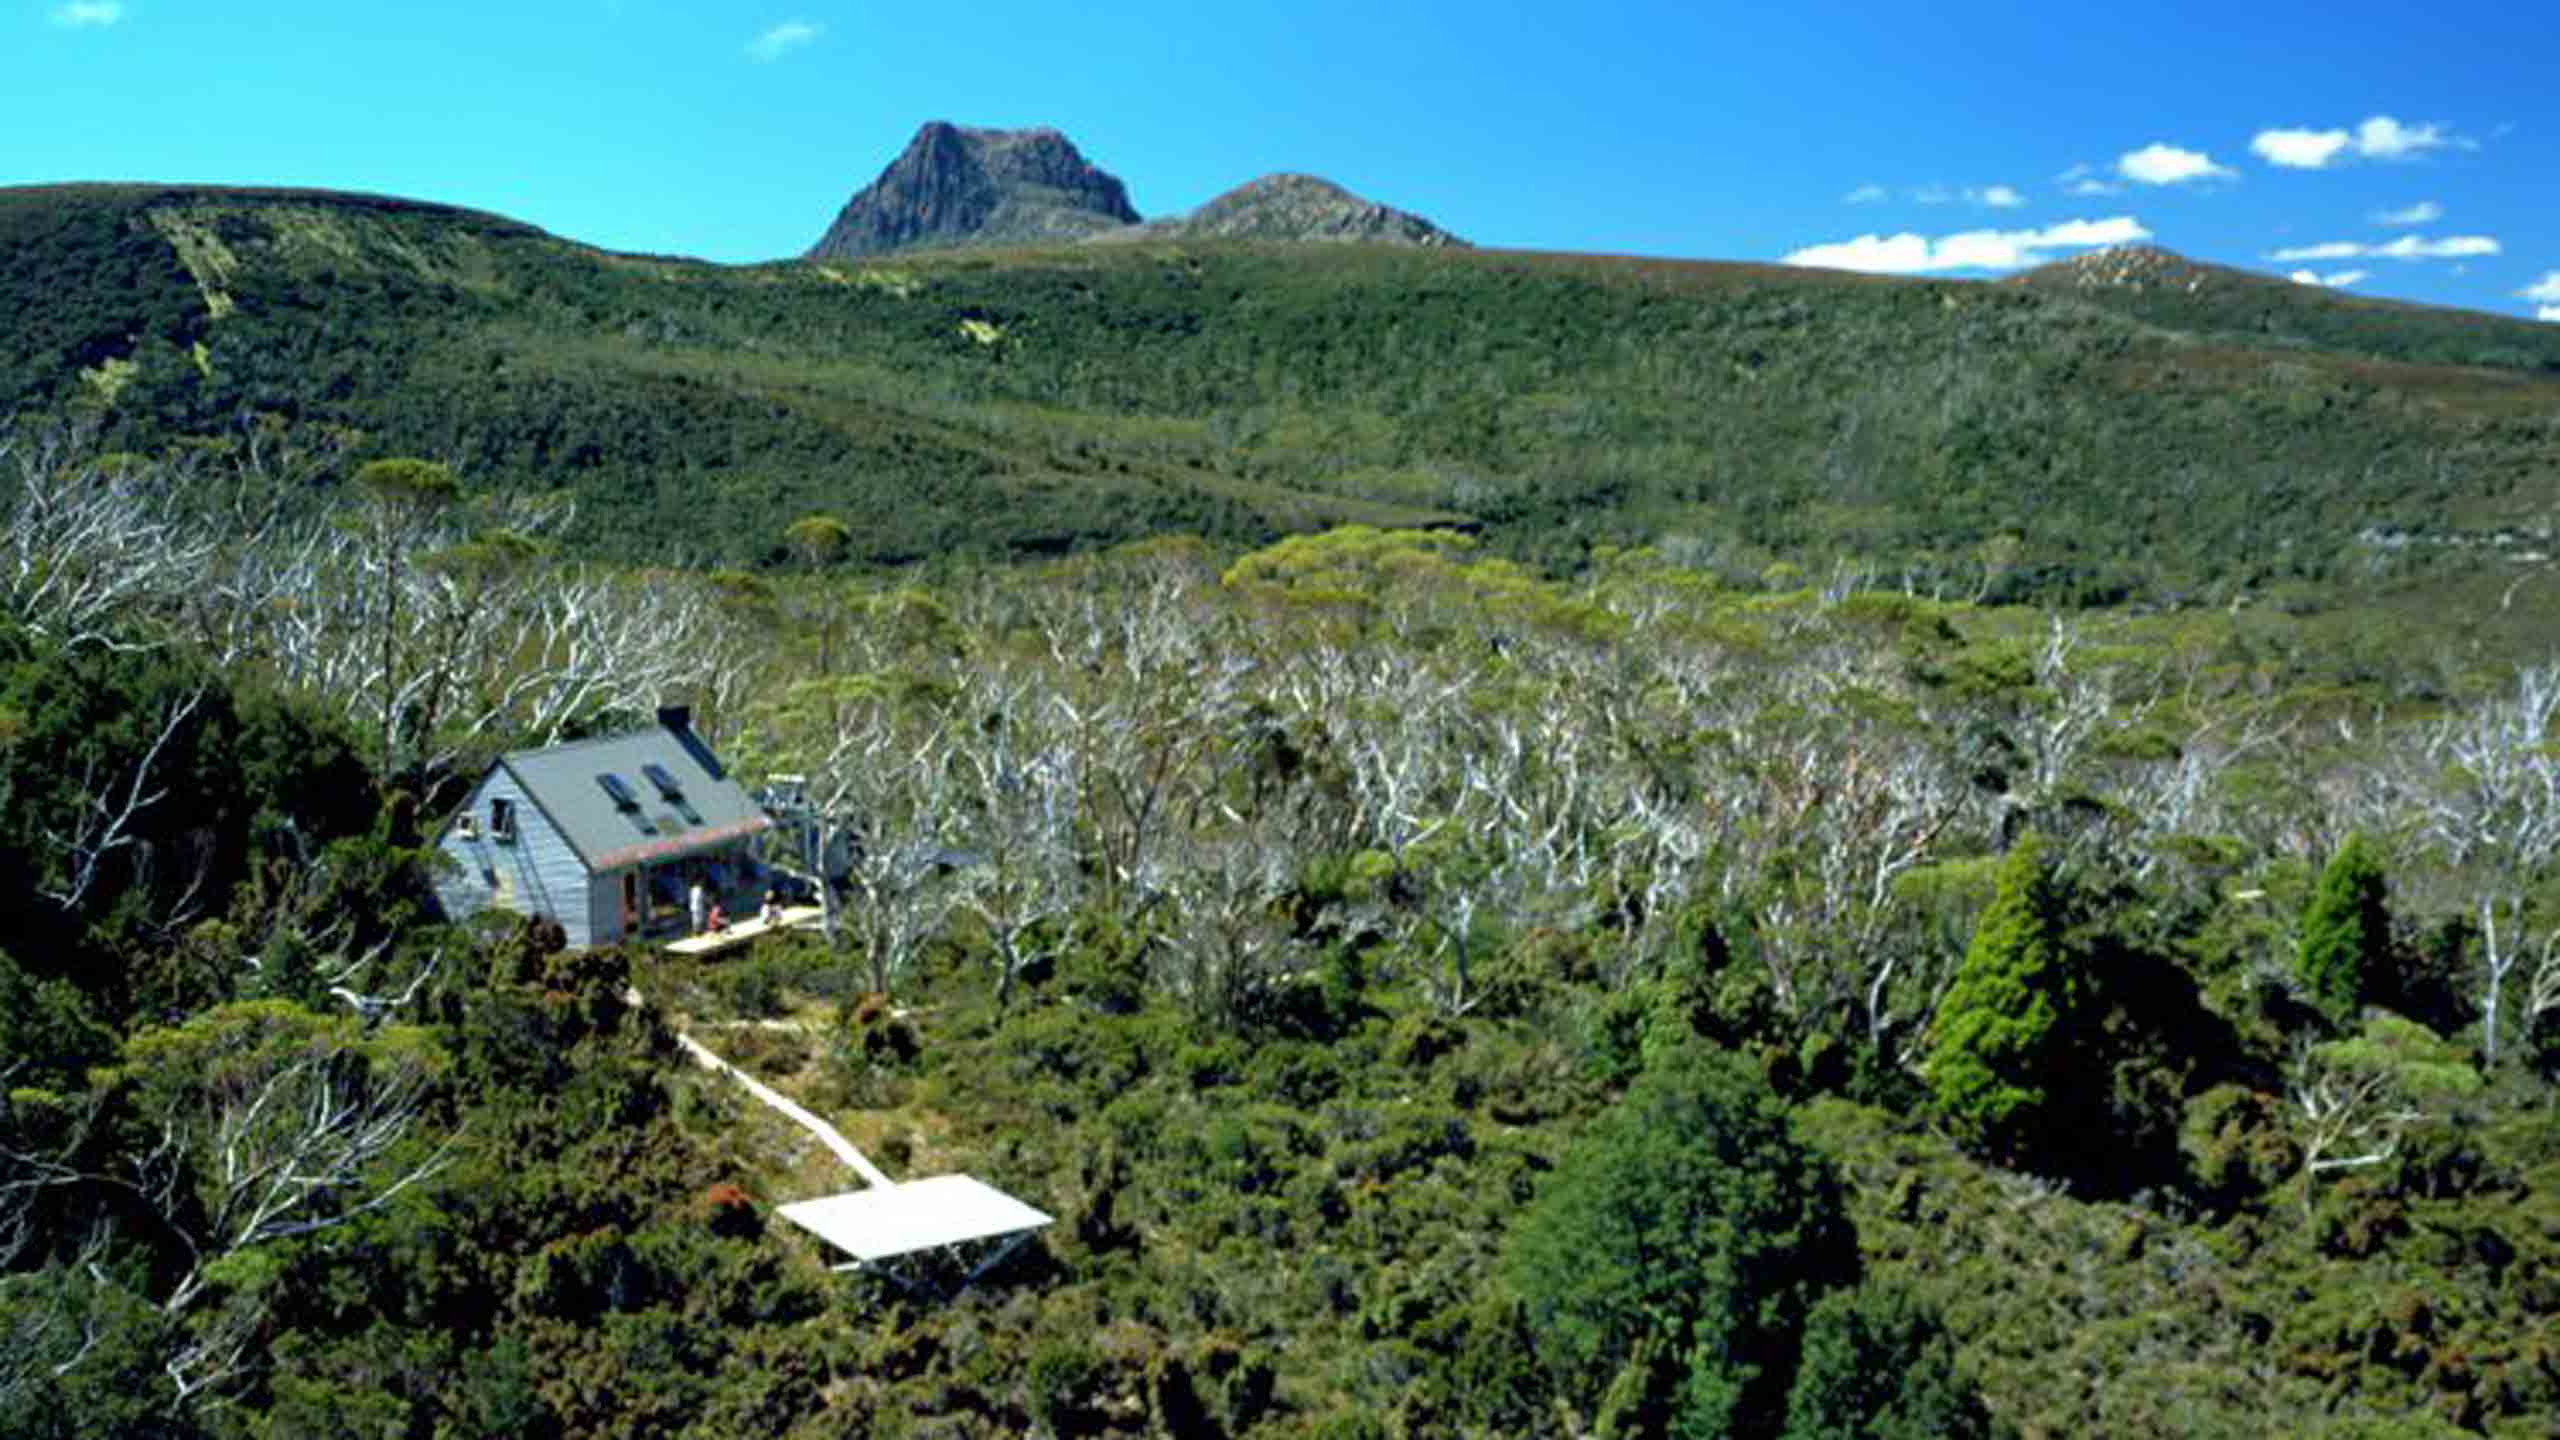 private-cradle-huts-cradle-mountain-overland-track-hut-exterior-view